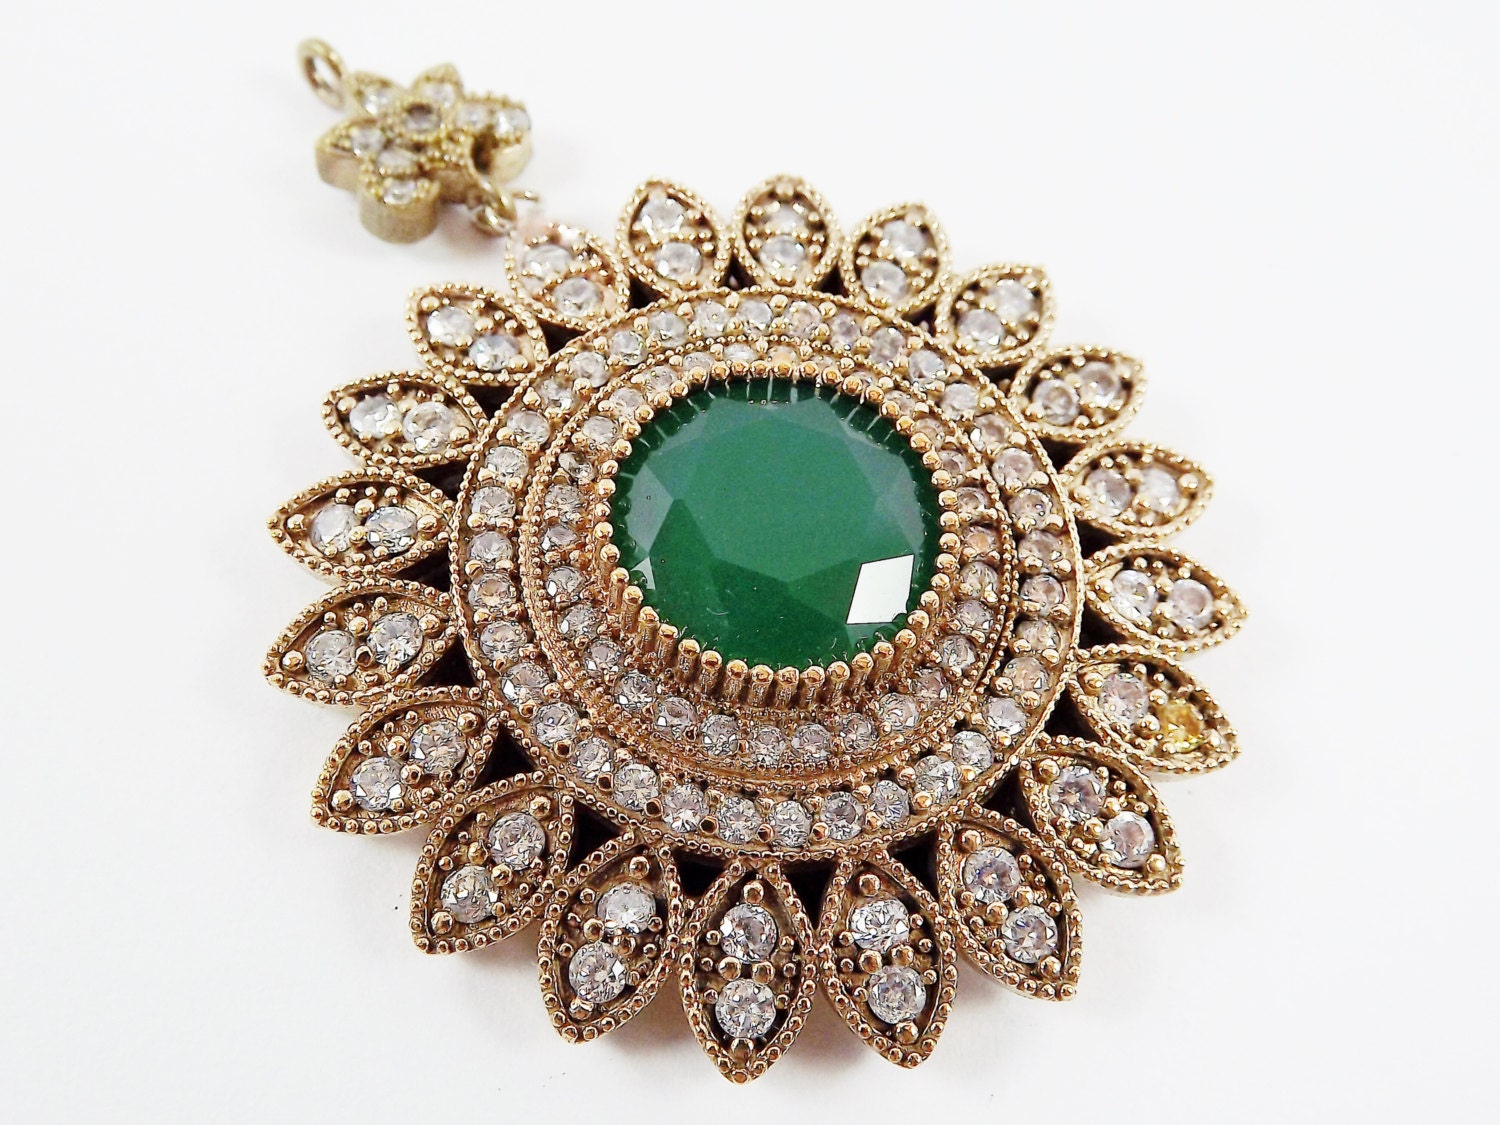 Large Round Flower Shaped Green & Clear Rhinestone Crystal Pendant - Antique Bronze - 1PC